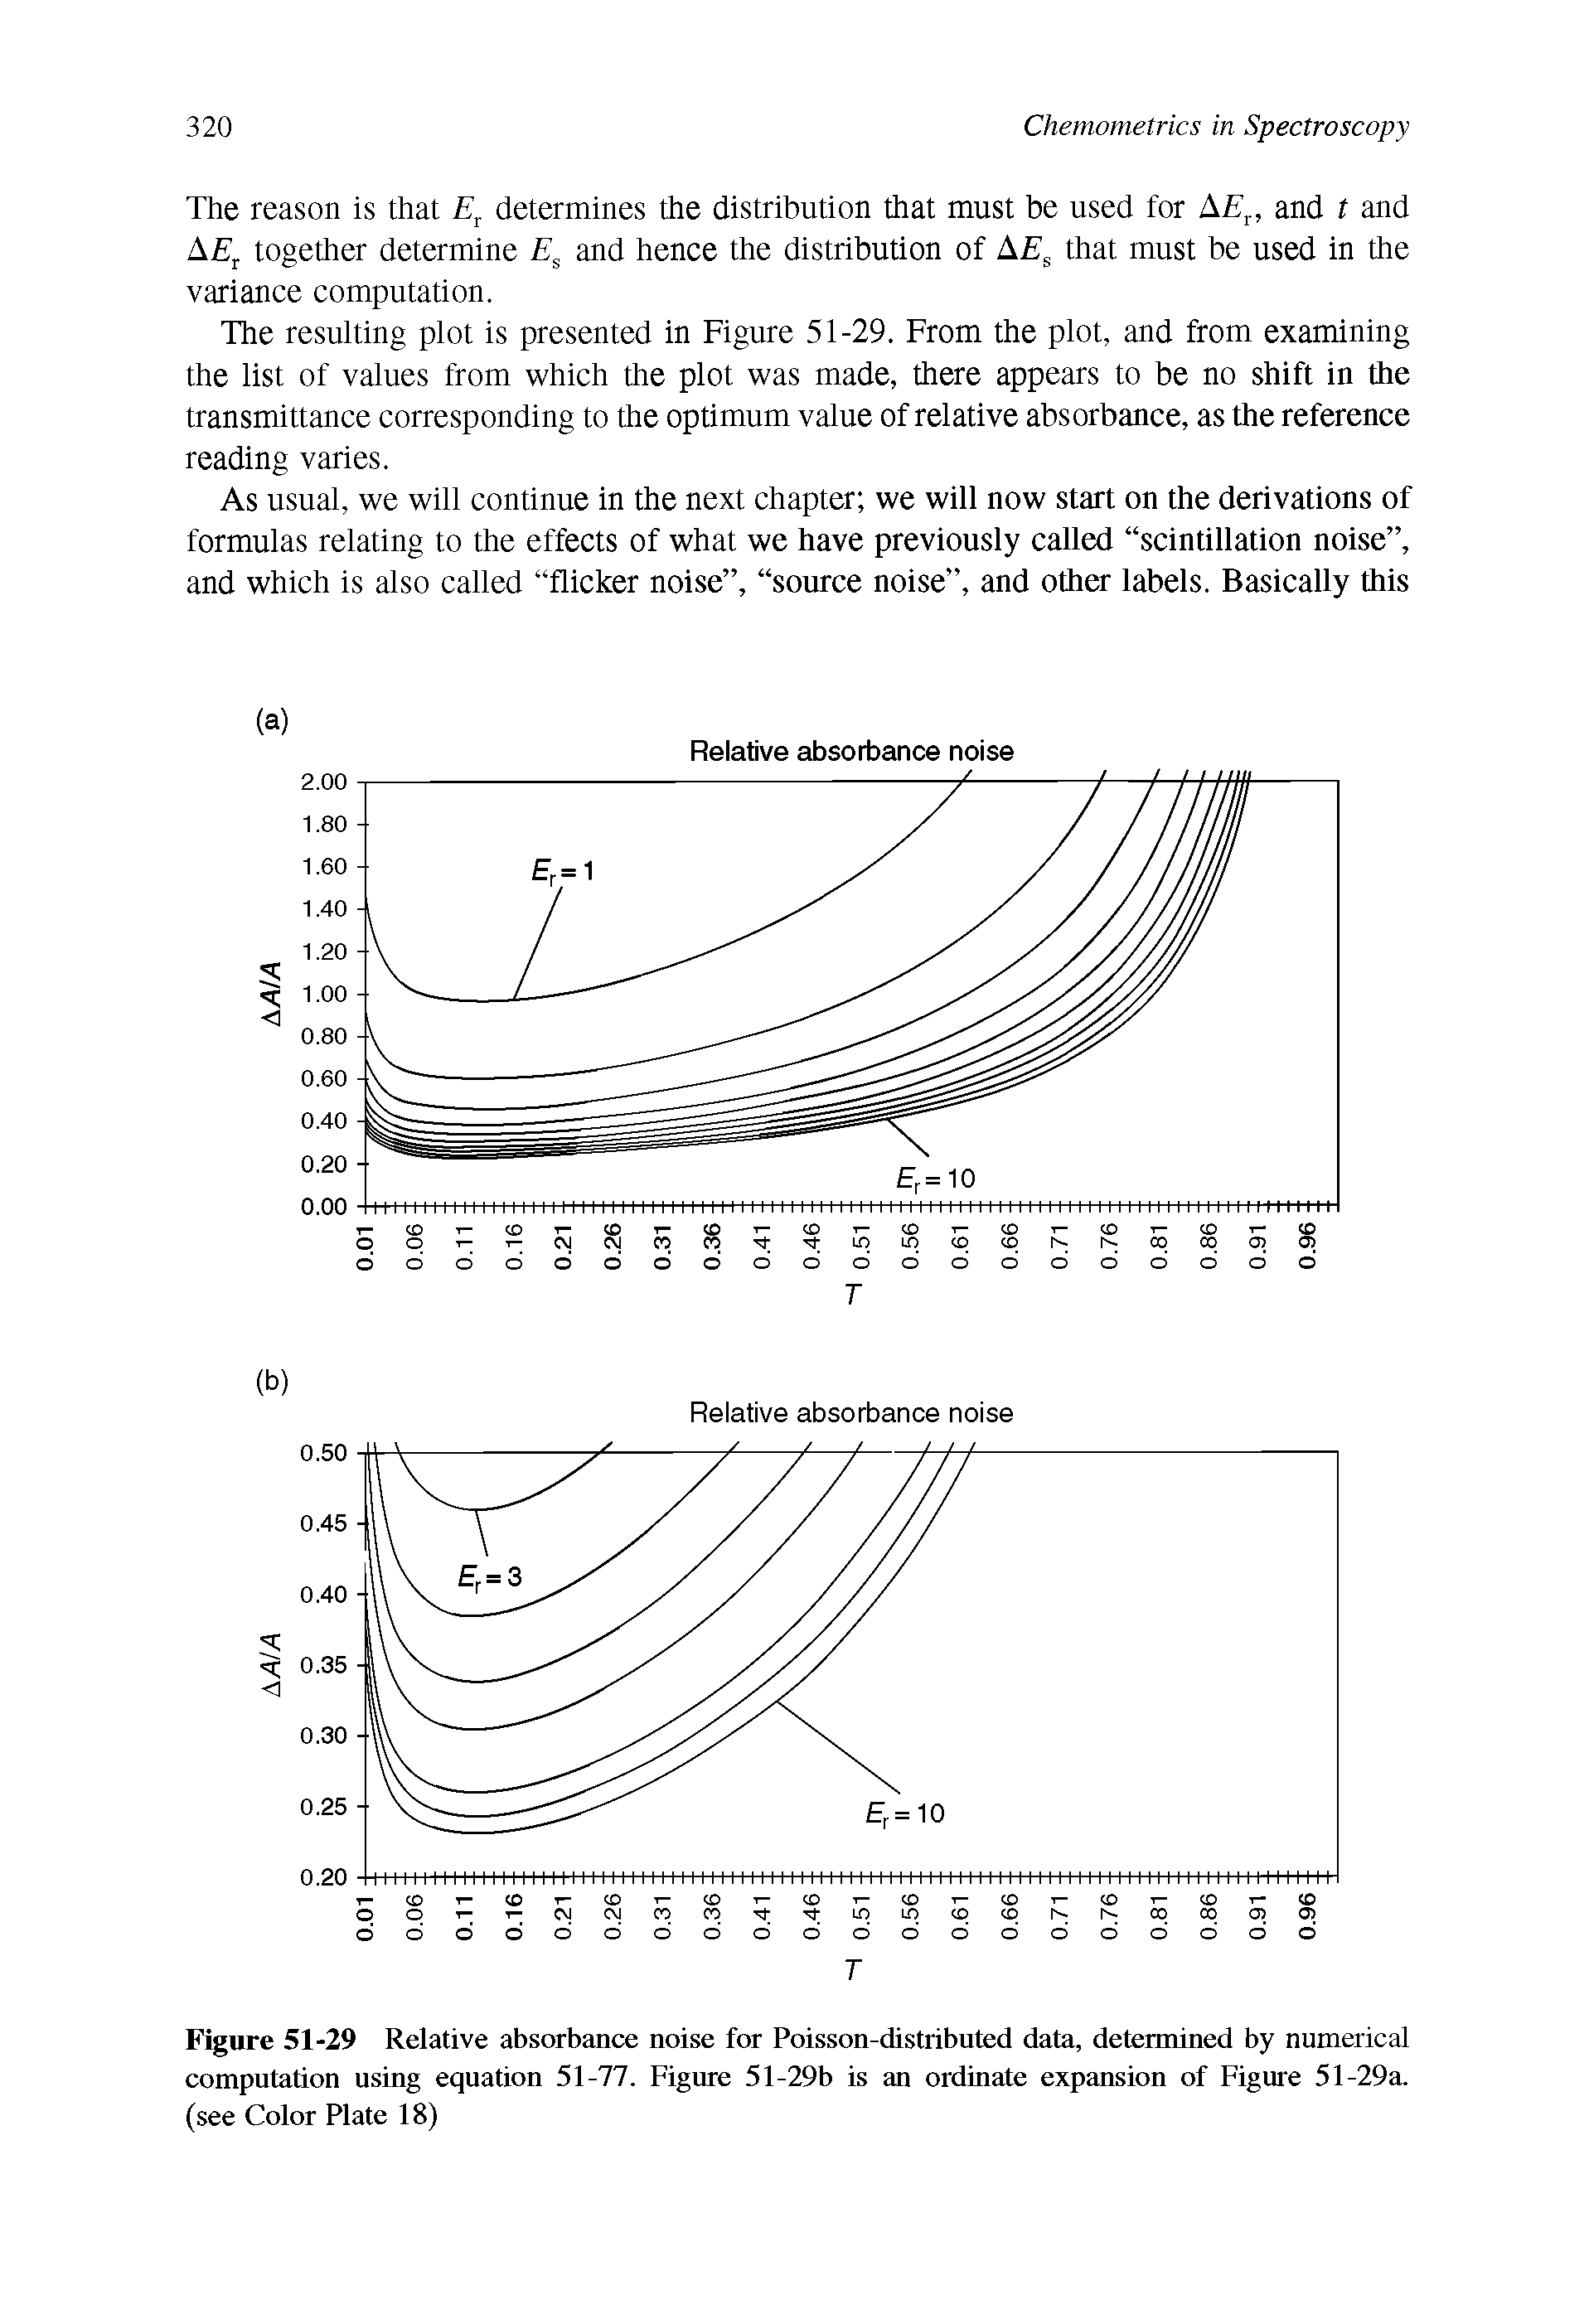 Figure 51-29 Relative absorbance noise for Poisson-distributed data, determined by numerical computation using equation 51-77. Figure 51-29b is an ordinate expansion of Figure 51-29a. (see Color Plate 18)...